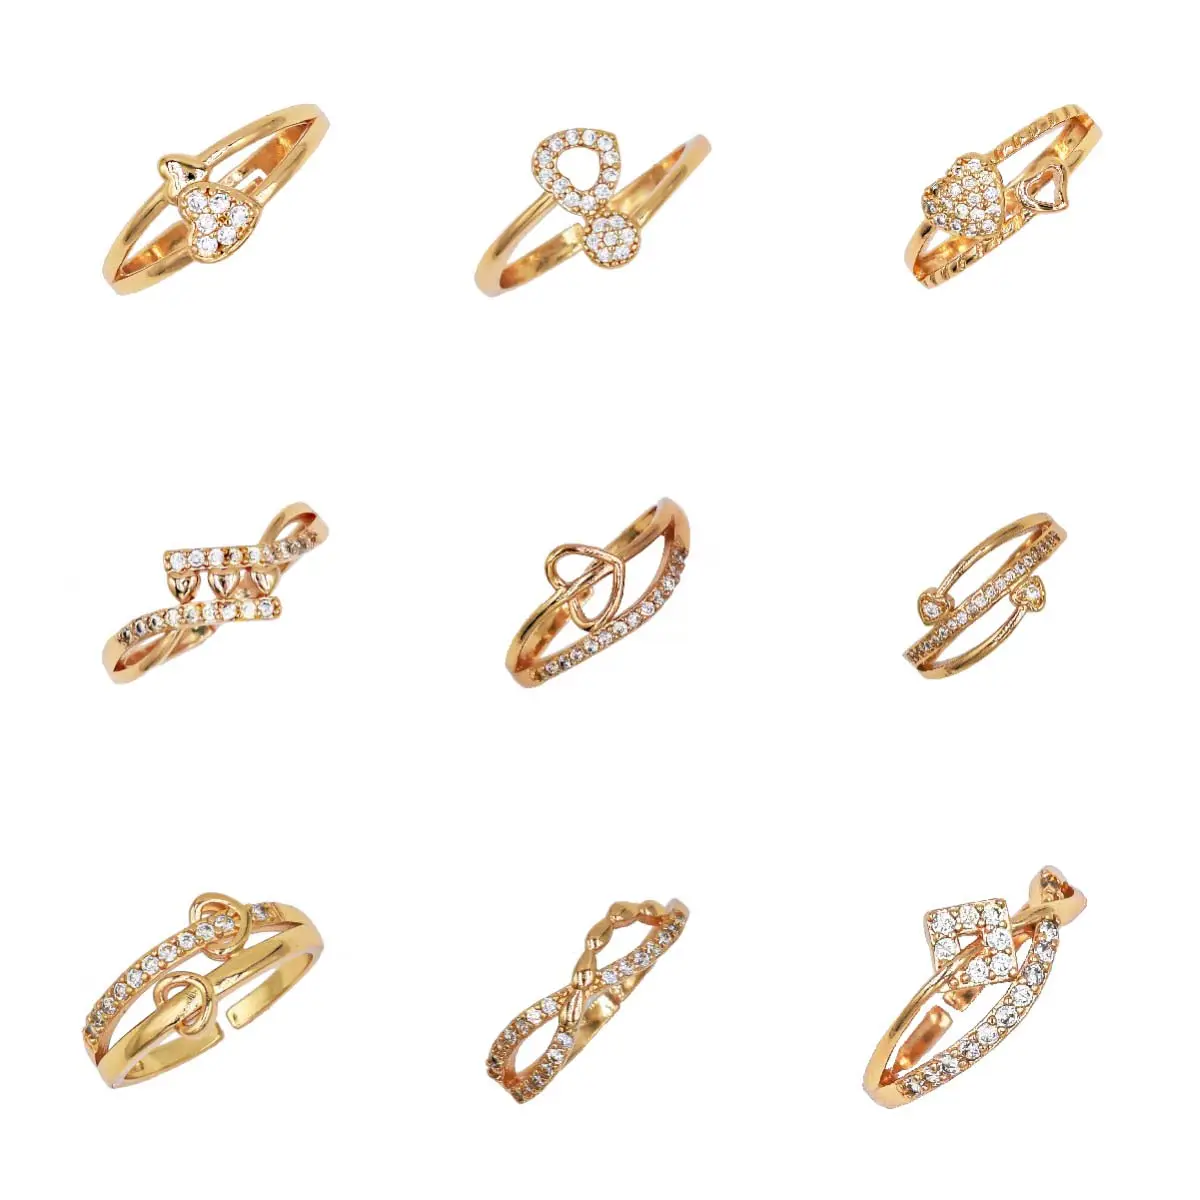 Classic and simple Wholesale 18k Gold Plated Diamond Ring Irregular geometric zircon fine jewelry for lady Accessories womens